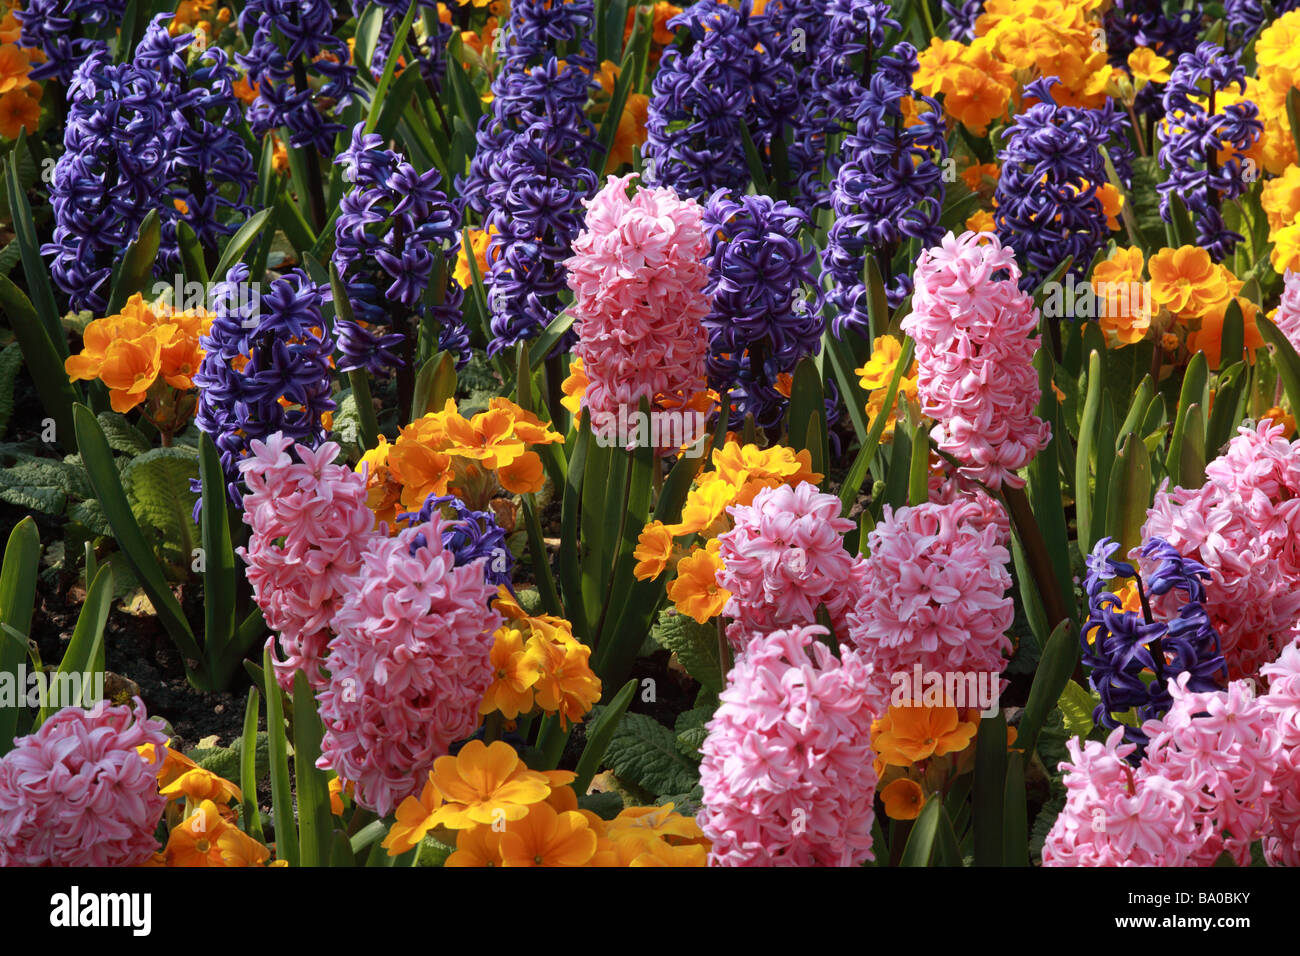 Planted display of brightly coloured spring flowers, Hyacinth & primulas in an English spring garden border, UK Stock Photo